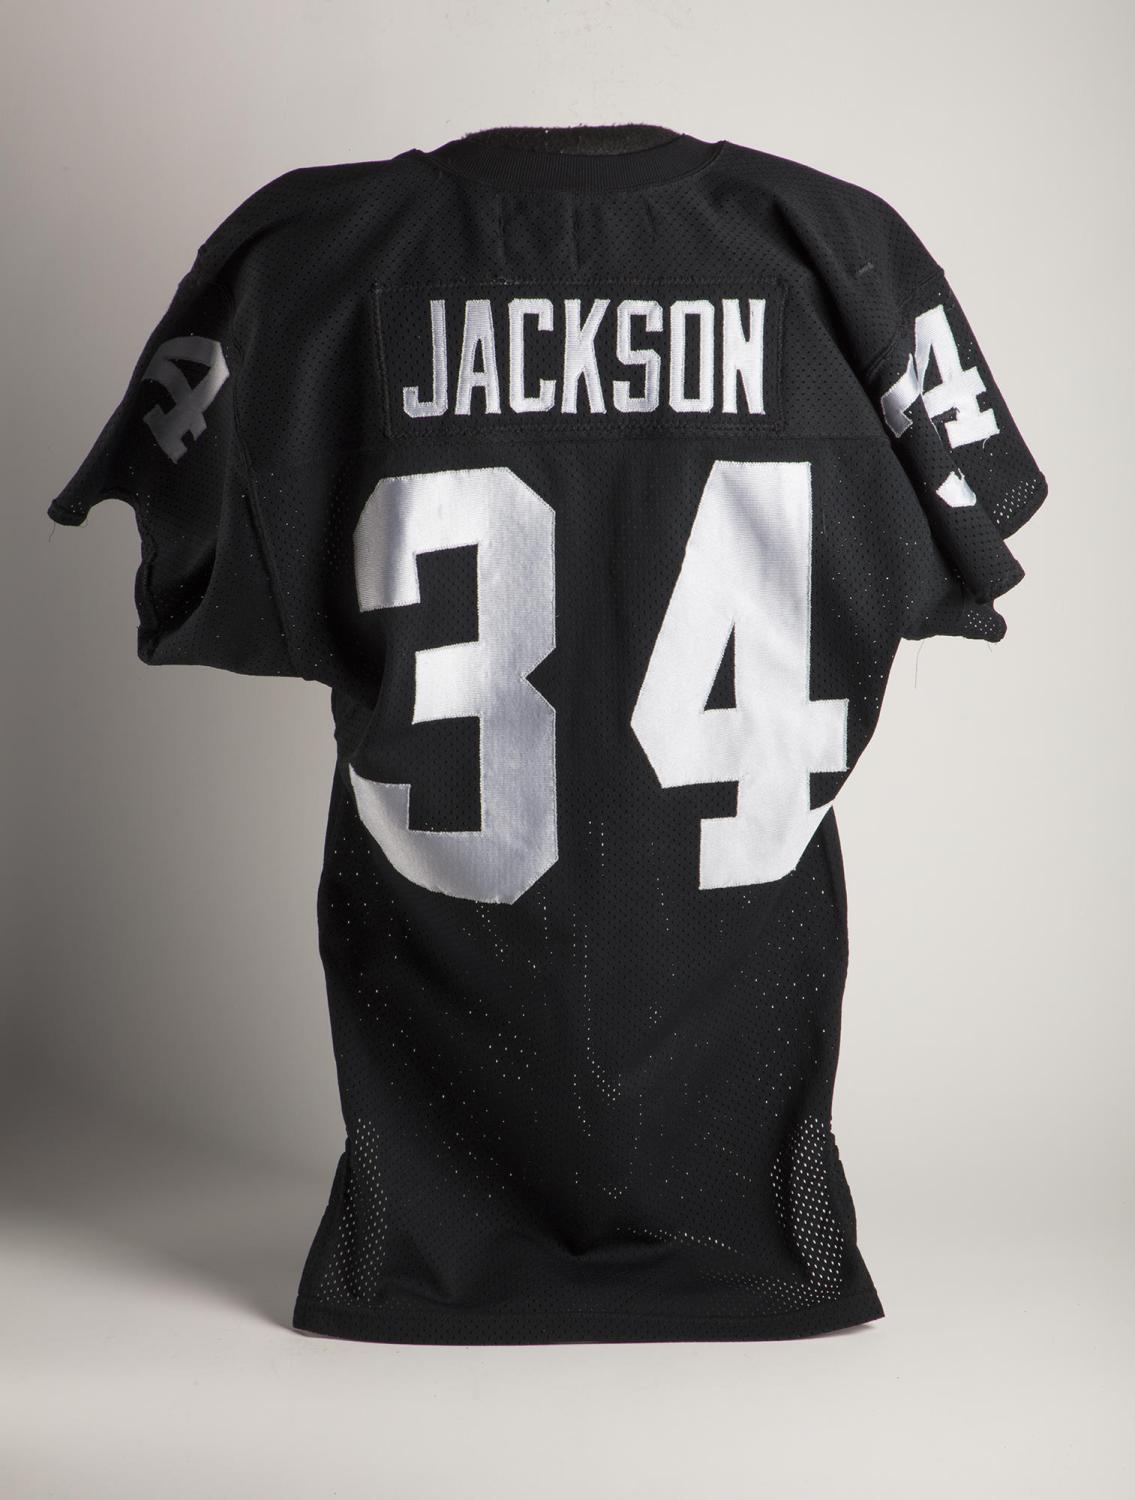 Recensent hooi Verbieden GoingDeep: Research reveals Bo Jackson's final Raiders uniform is preserved  in Cooperstown | Baseball Hall of Fame